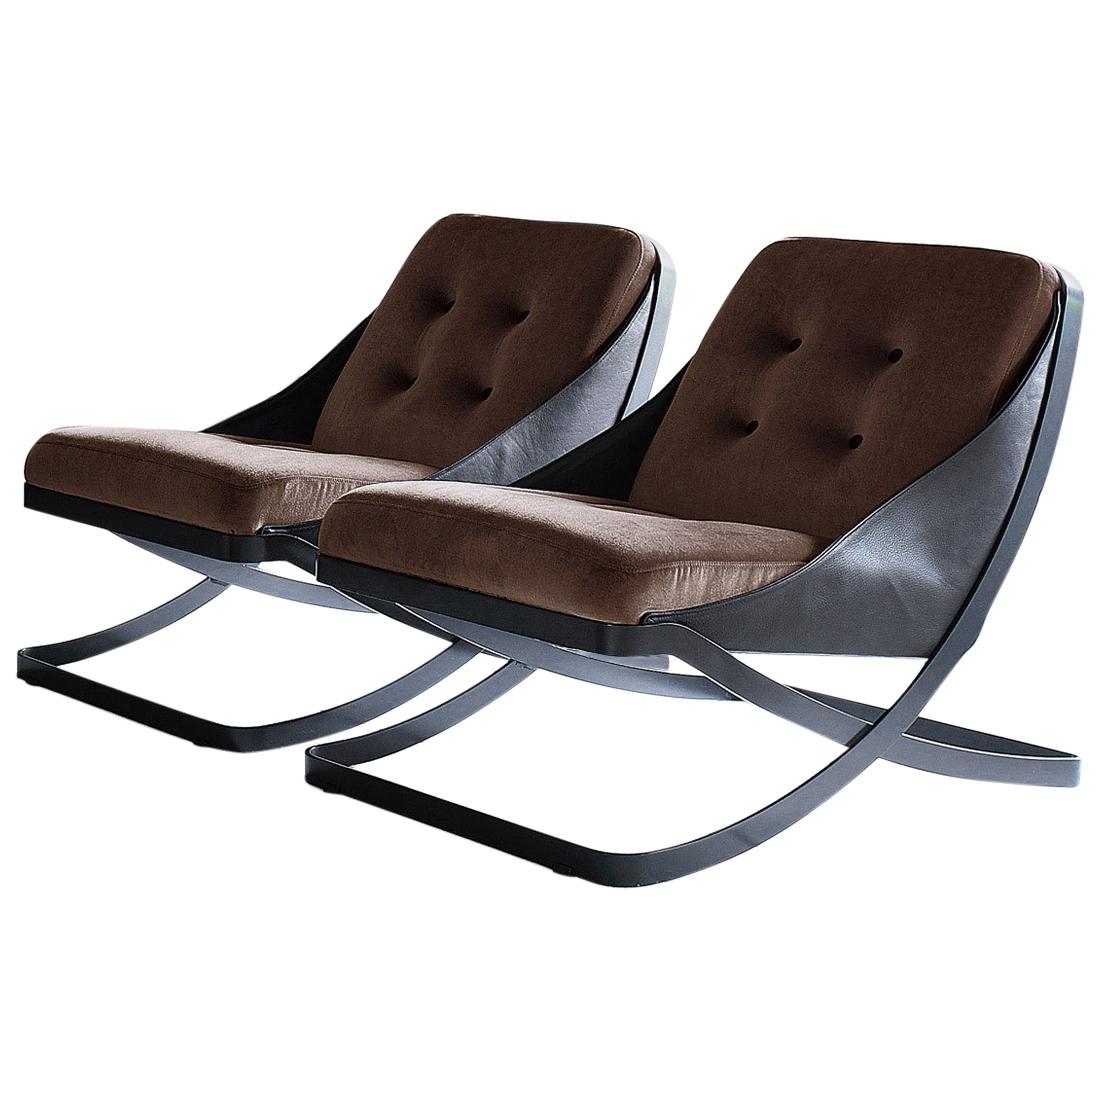 Nube Italia Rest Armchair in Brown and Black Fabric by Carlo Colombo